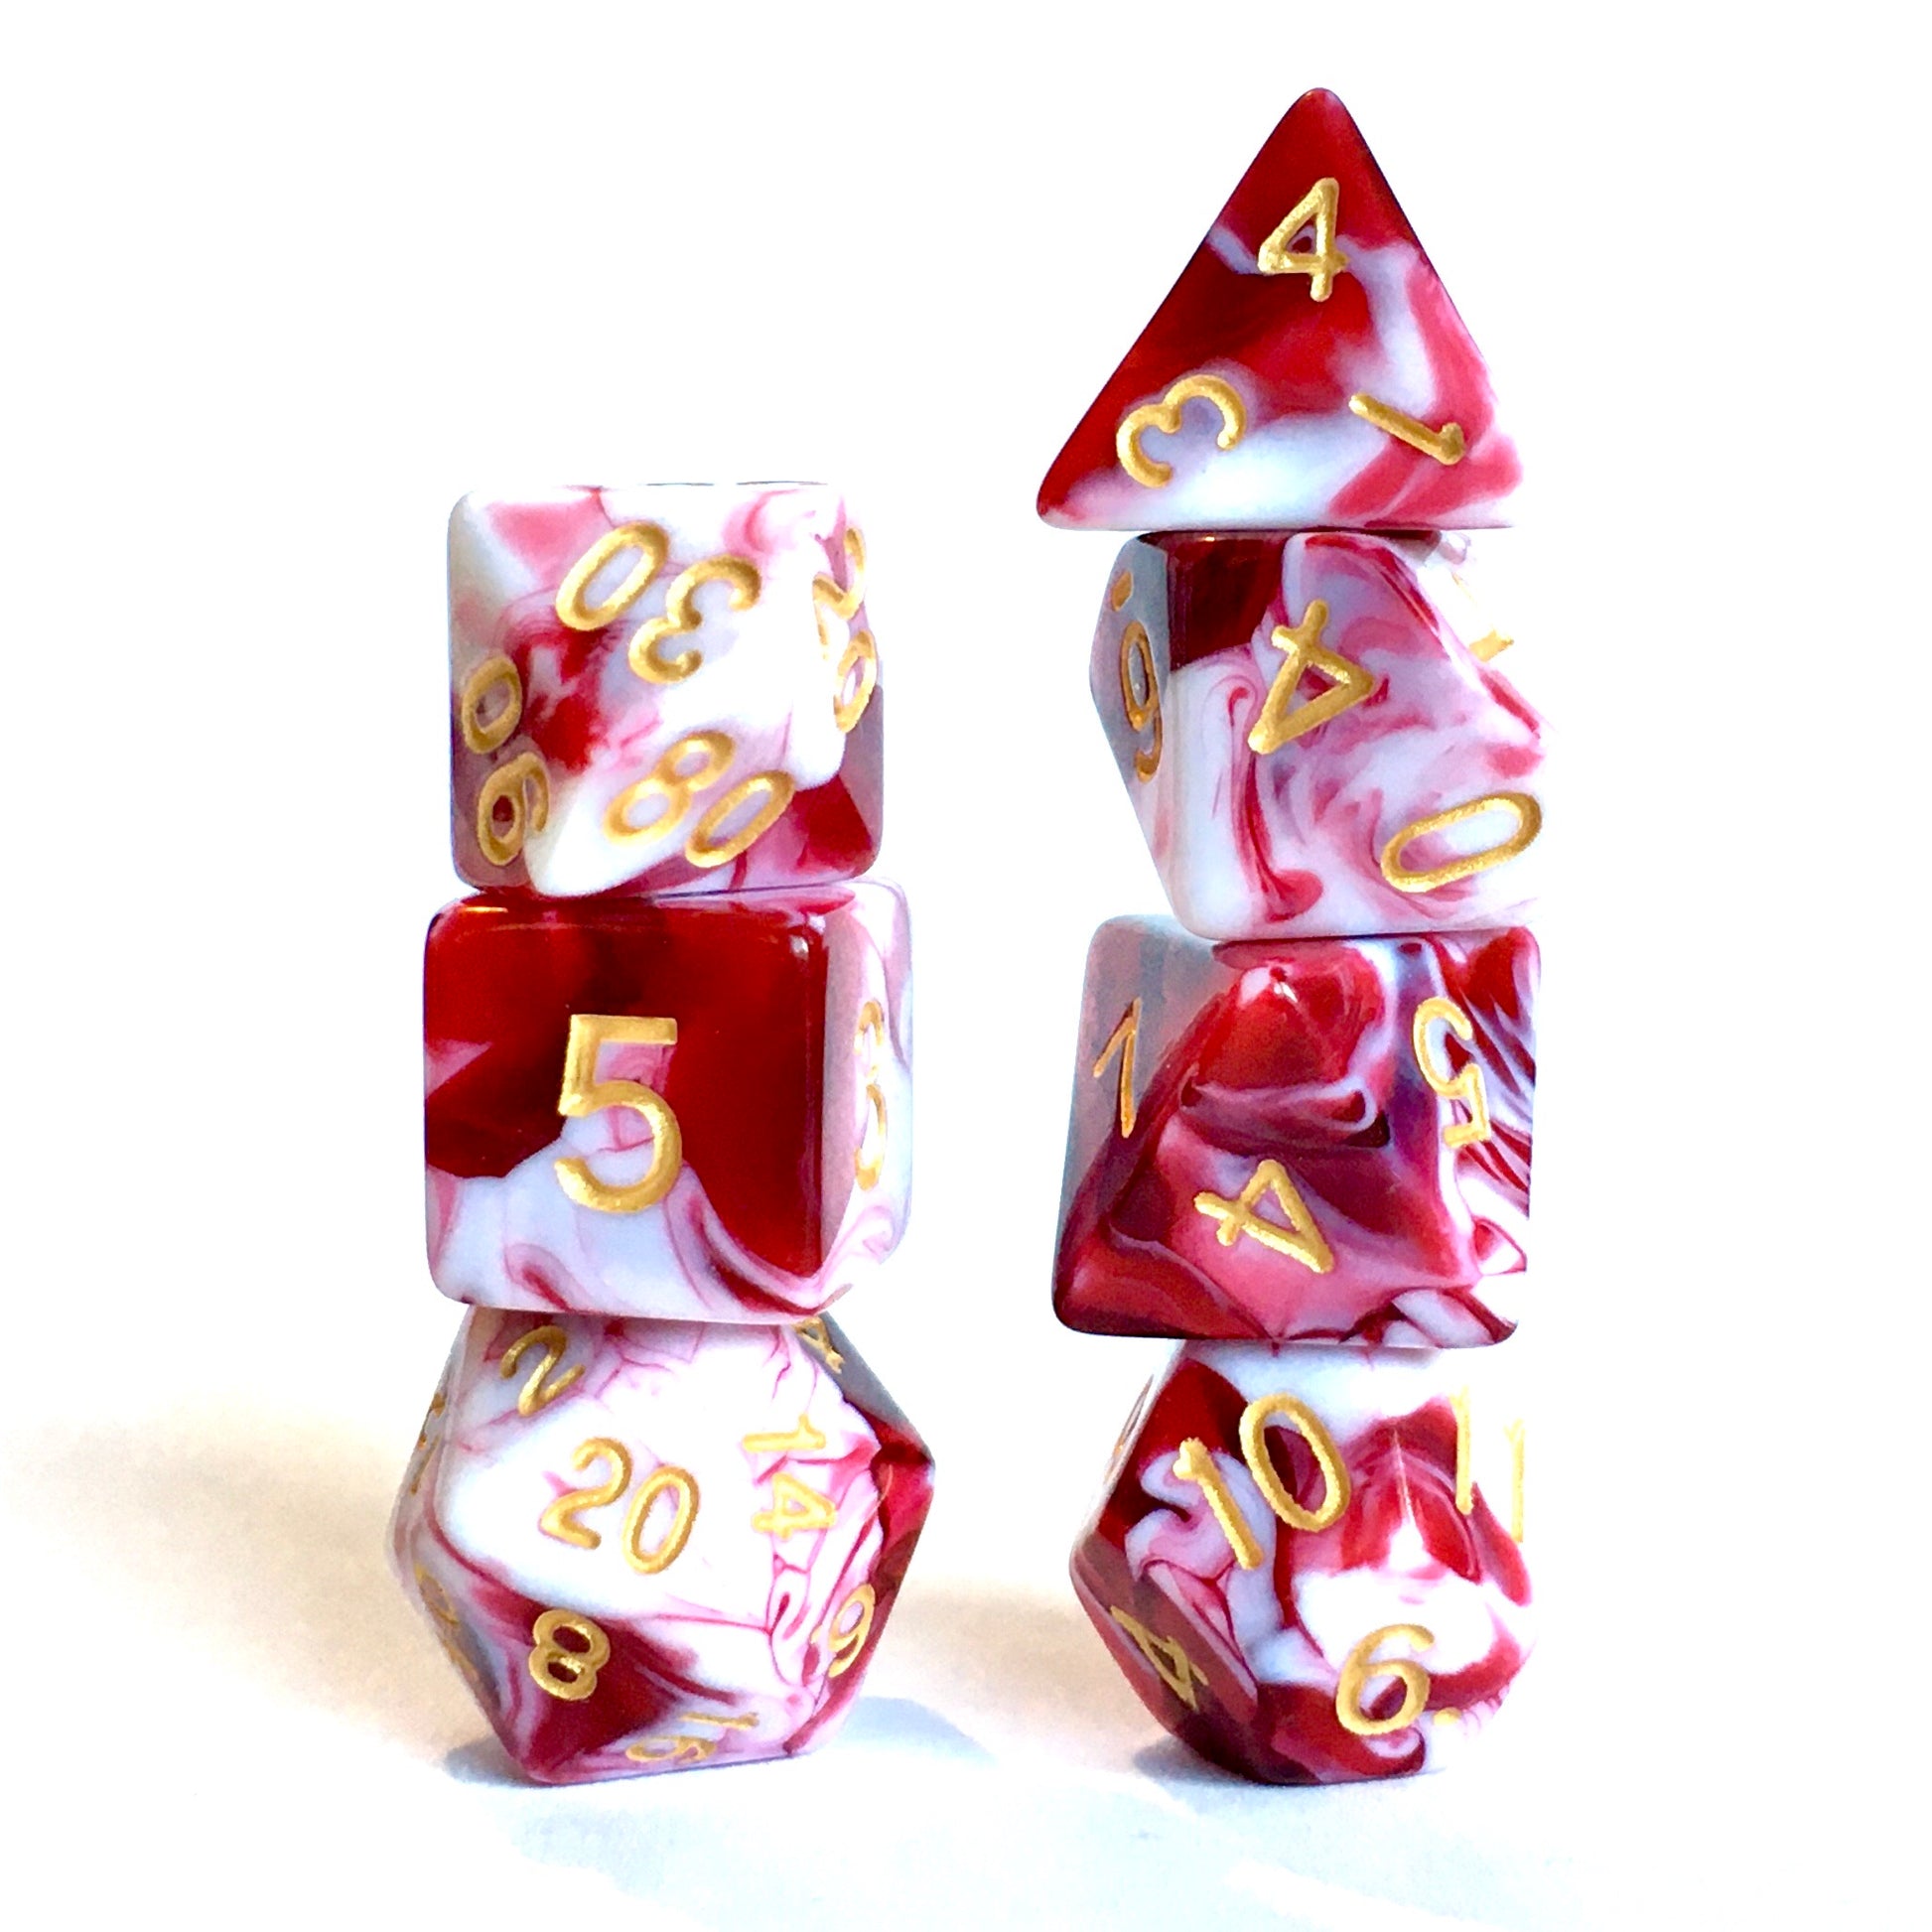 Swirls dnd TTRPG dice set for RPG role playing games and dice goblin collectors from a UK dice store